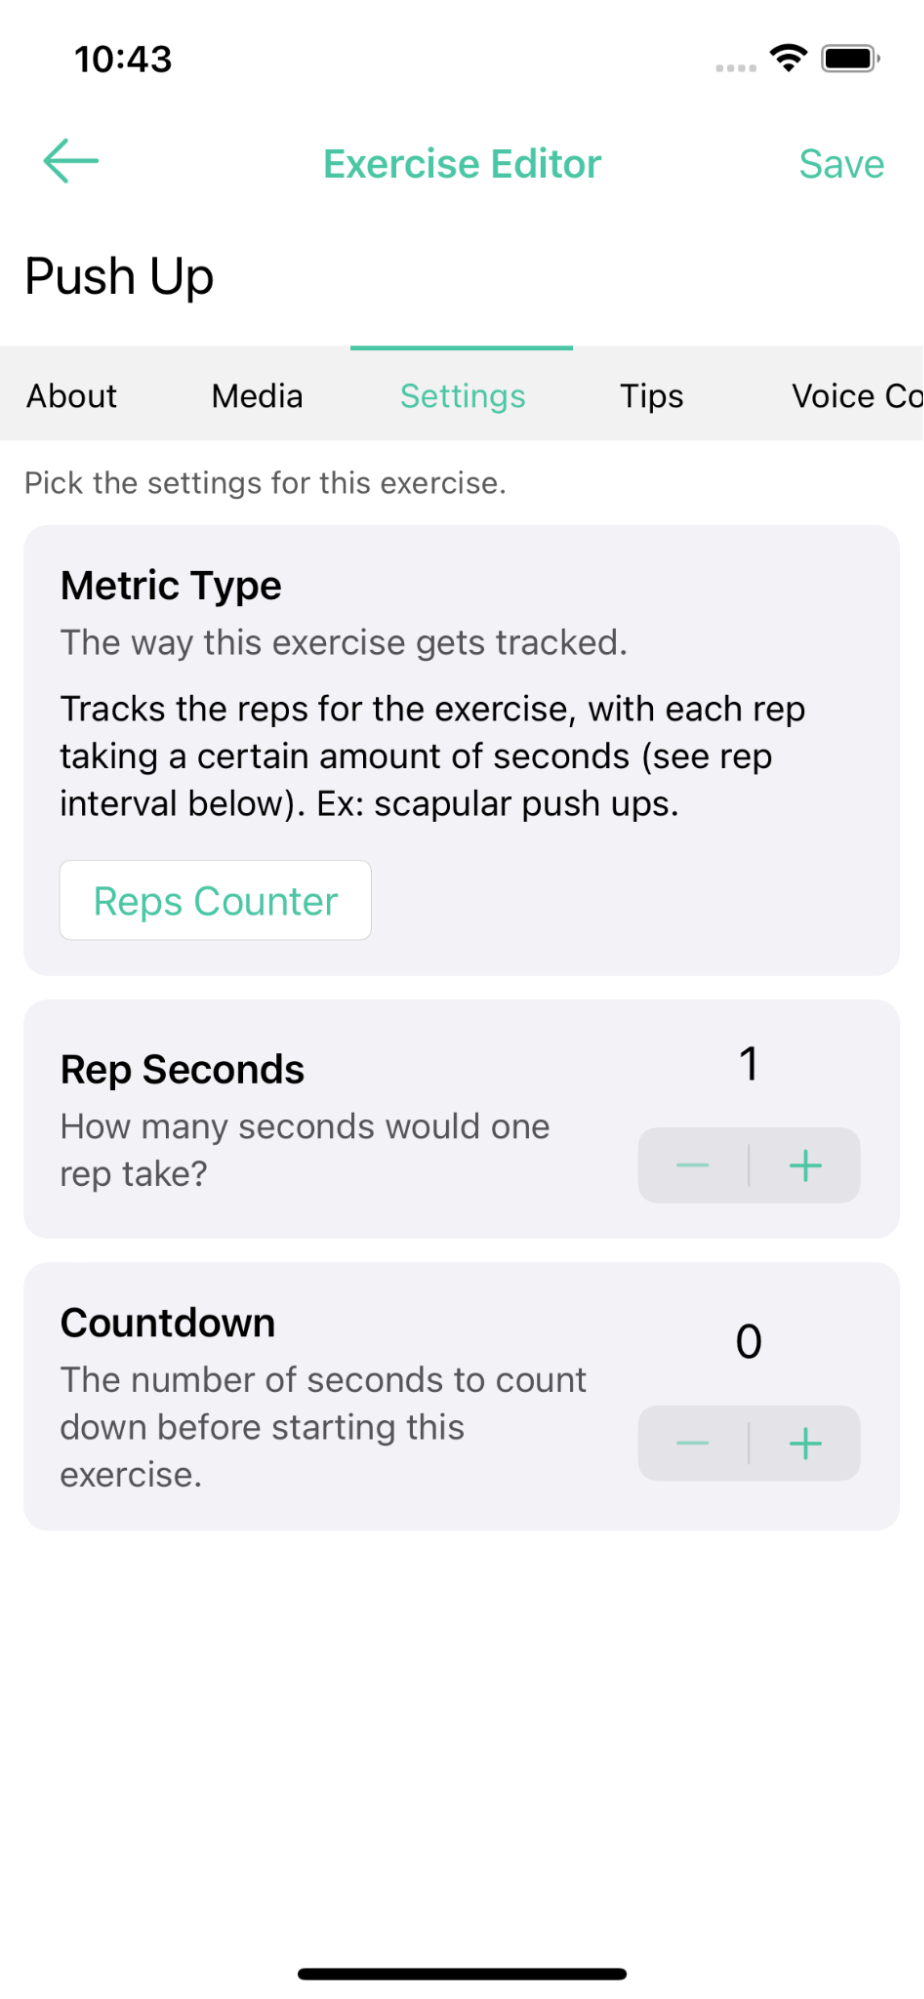 Exercise Metric type defines how to treat the exercise for tracking or playing in a workout